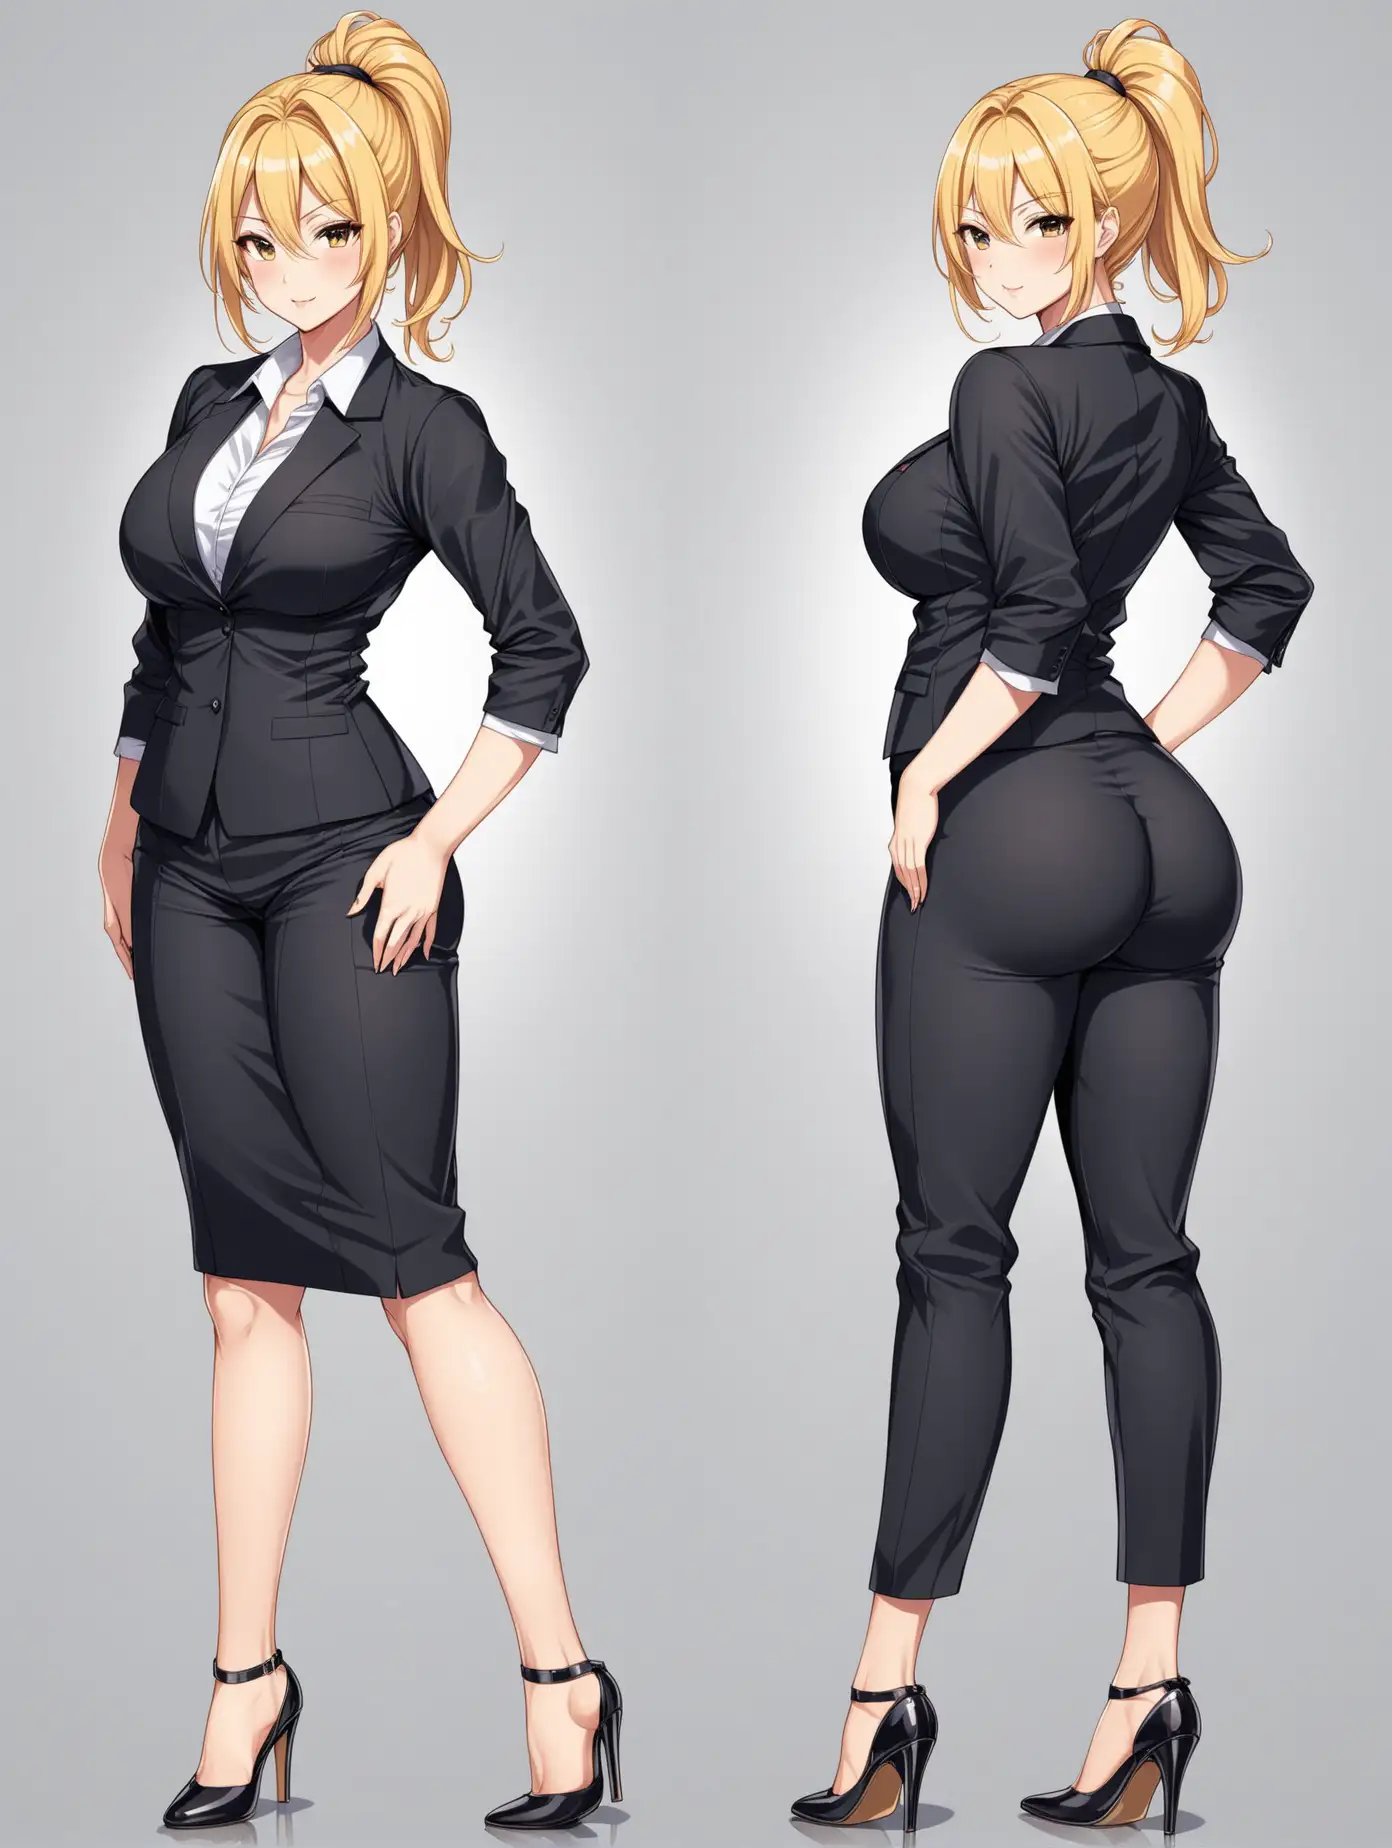 Full body picture of a sexy anime woman, age 40, height tall, big ass, blonde hair tied, office wear, ankle strip high heels, 2 poses